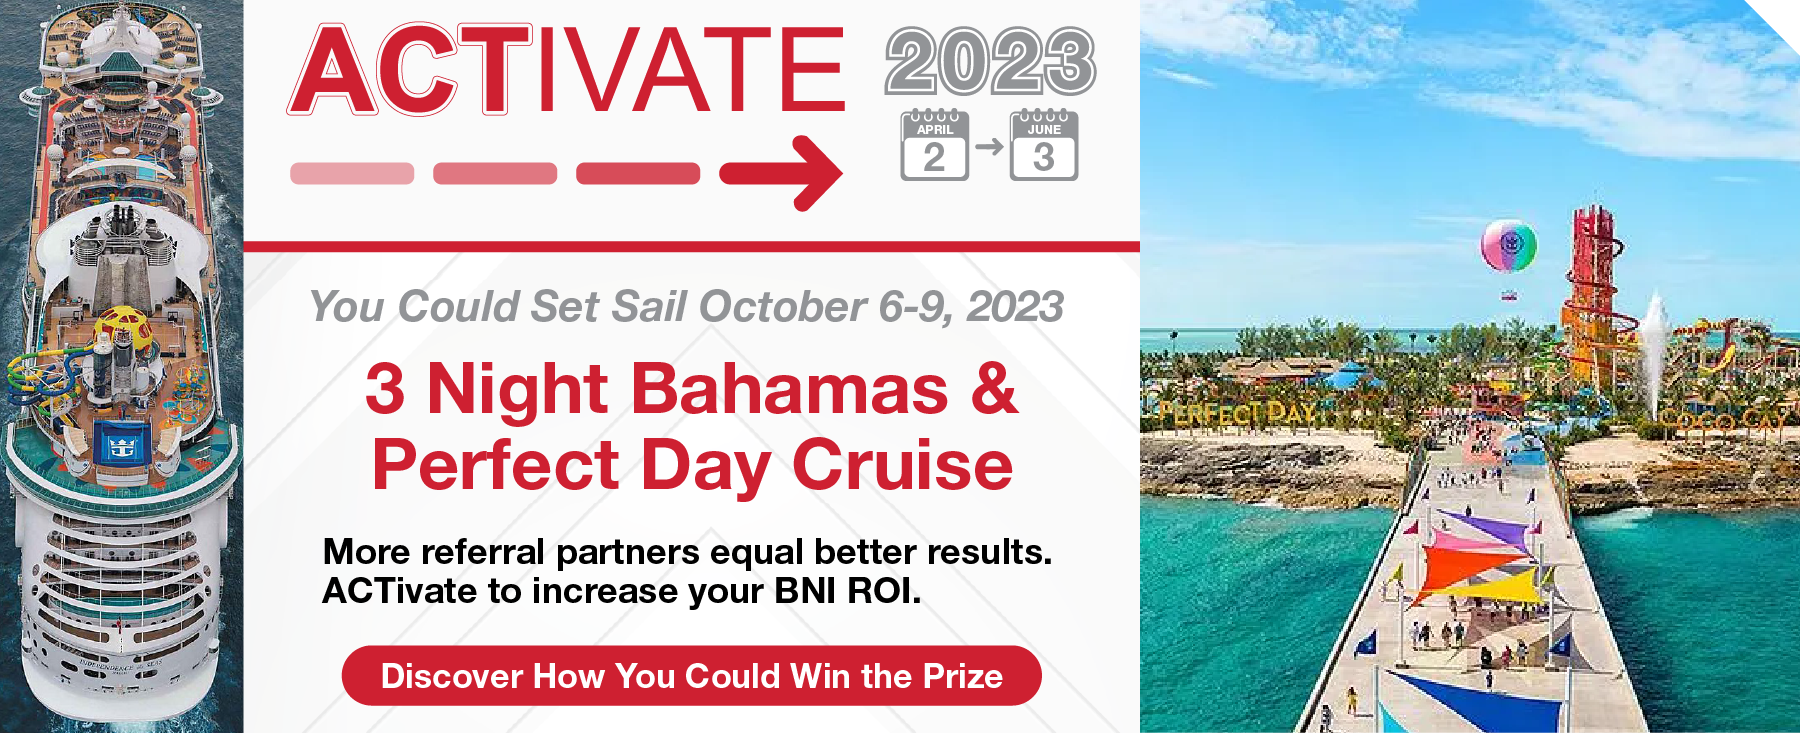 Activate 2023 | You could Set Sail October 6-9, 2023